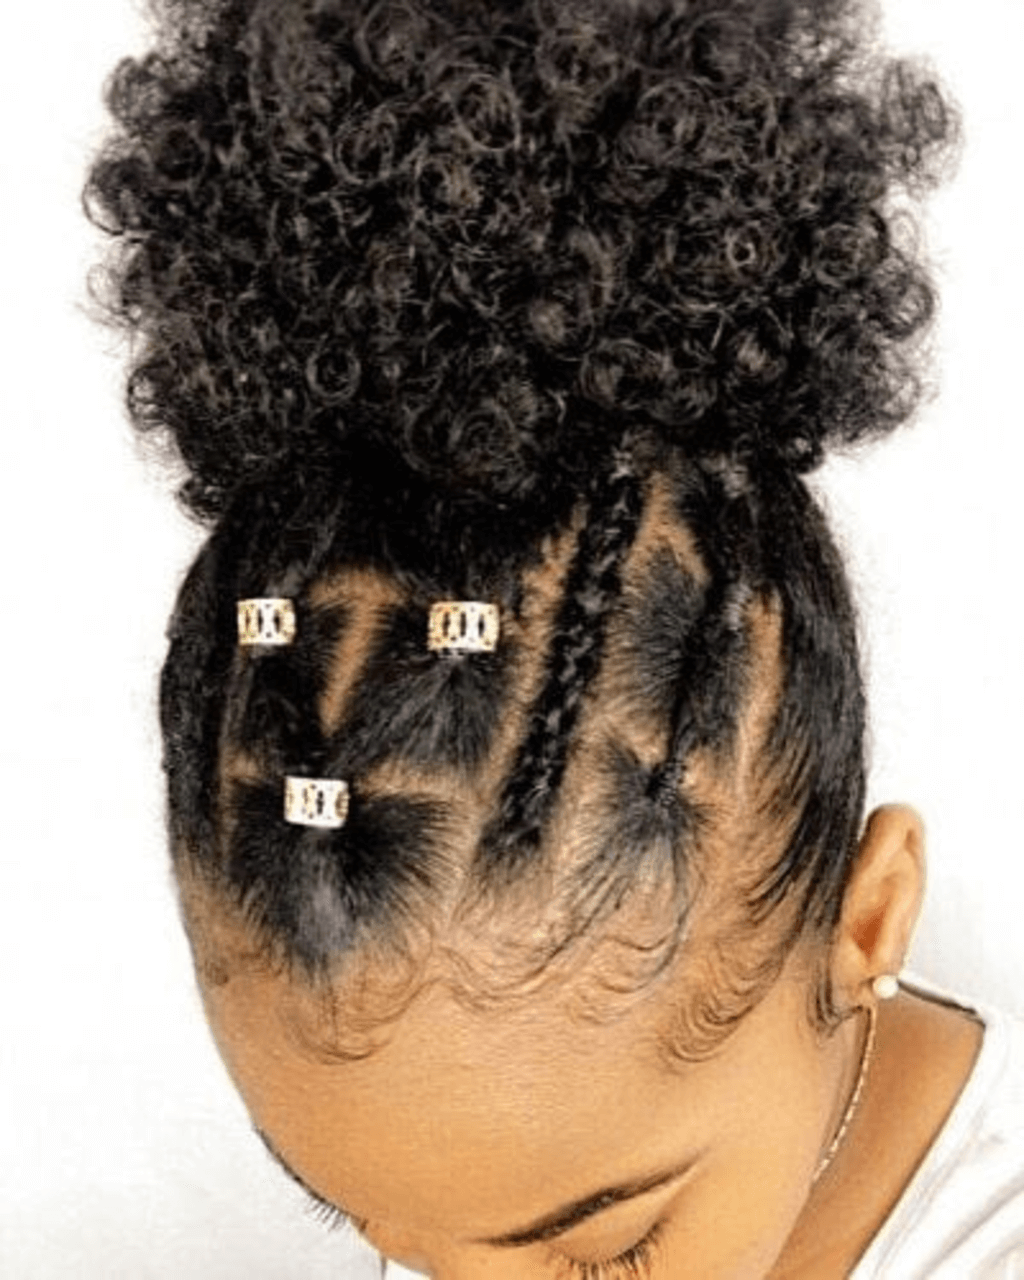 rubber band hairstyles